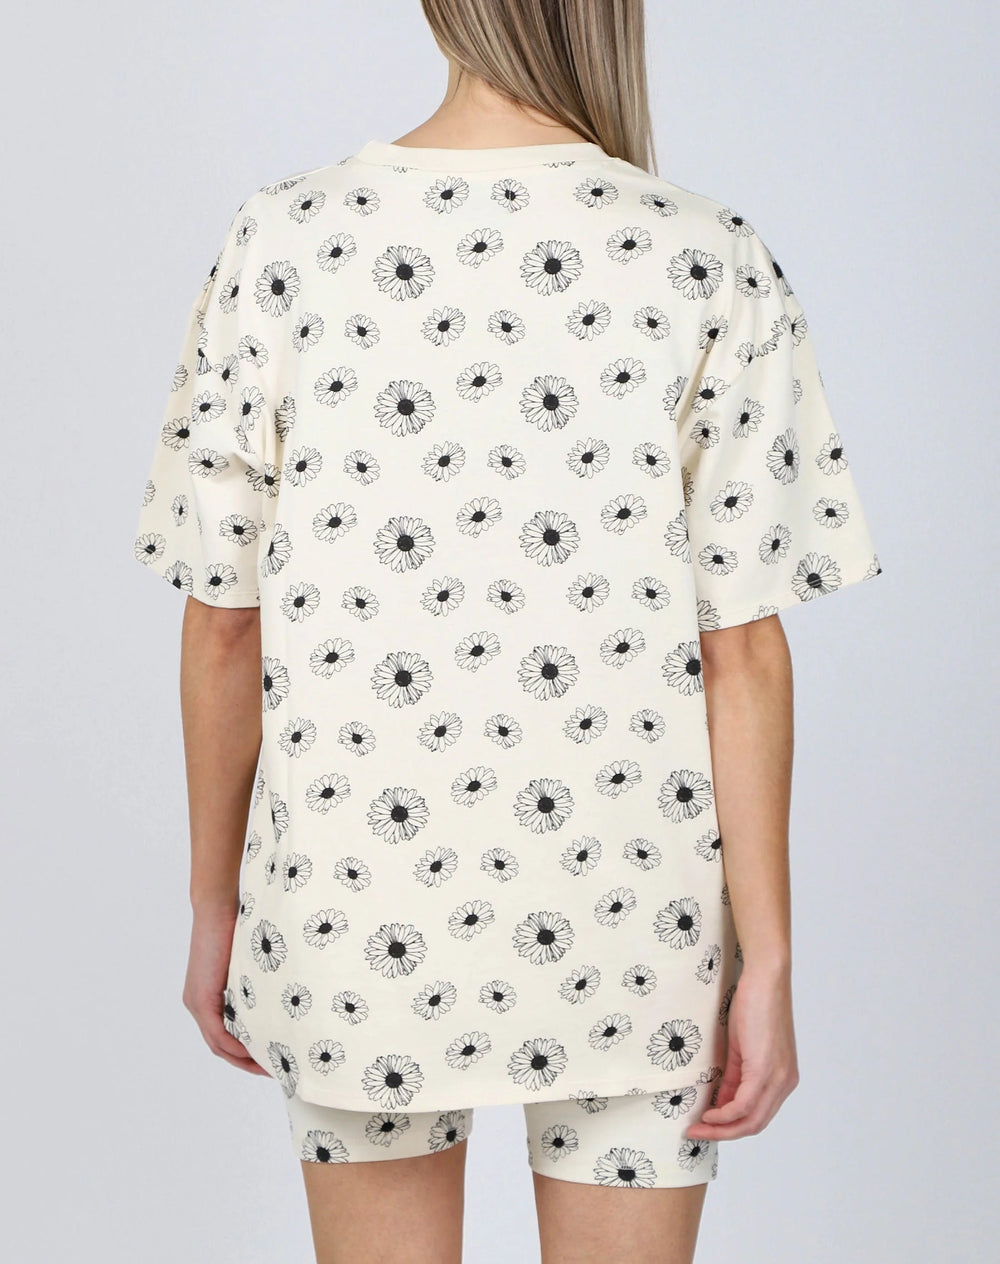 All Over Daisy Print Tee by Brunette The Label